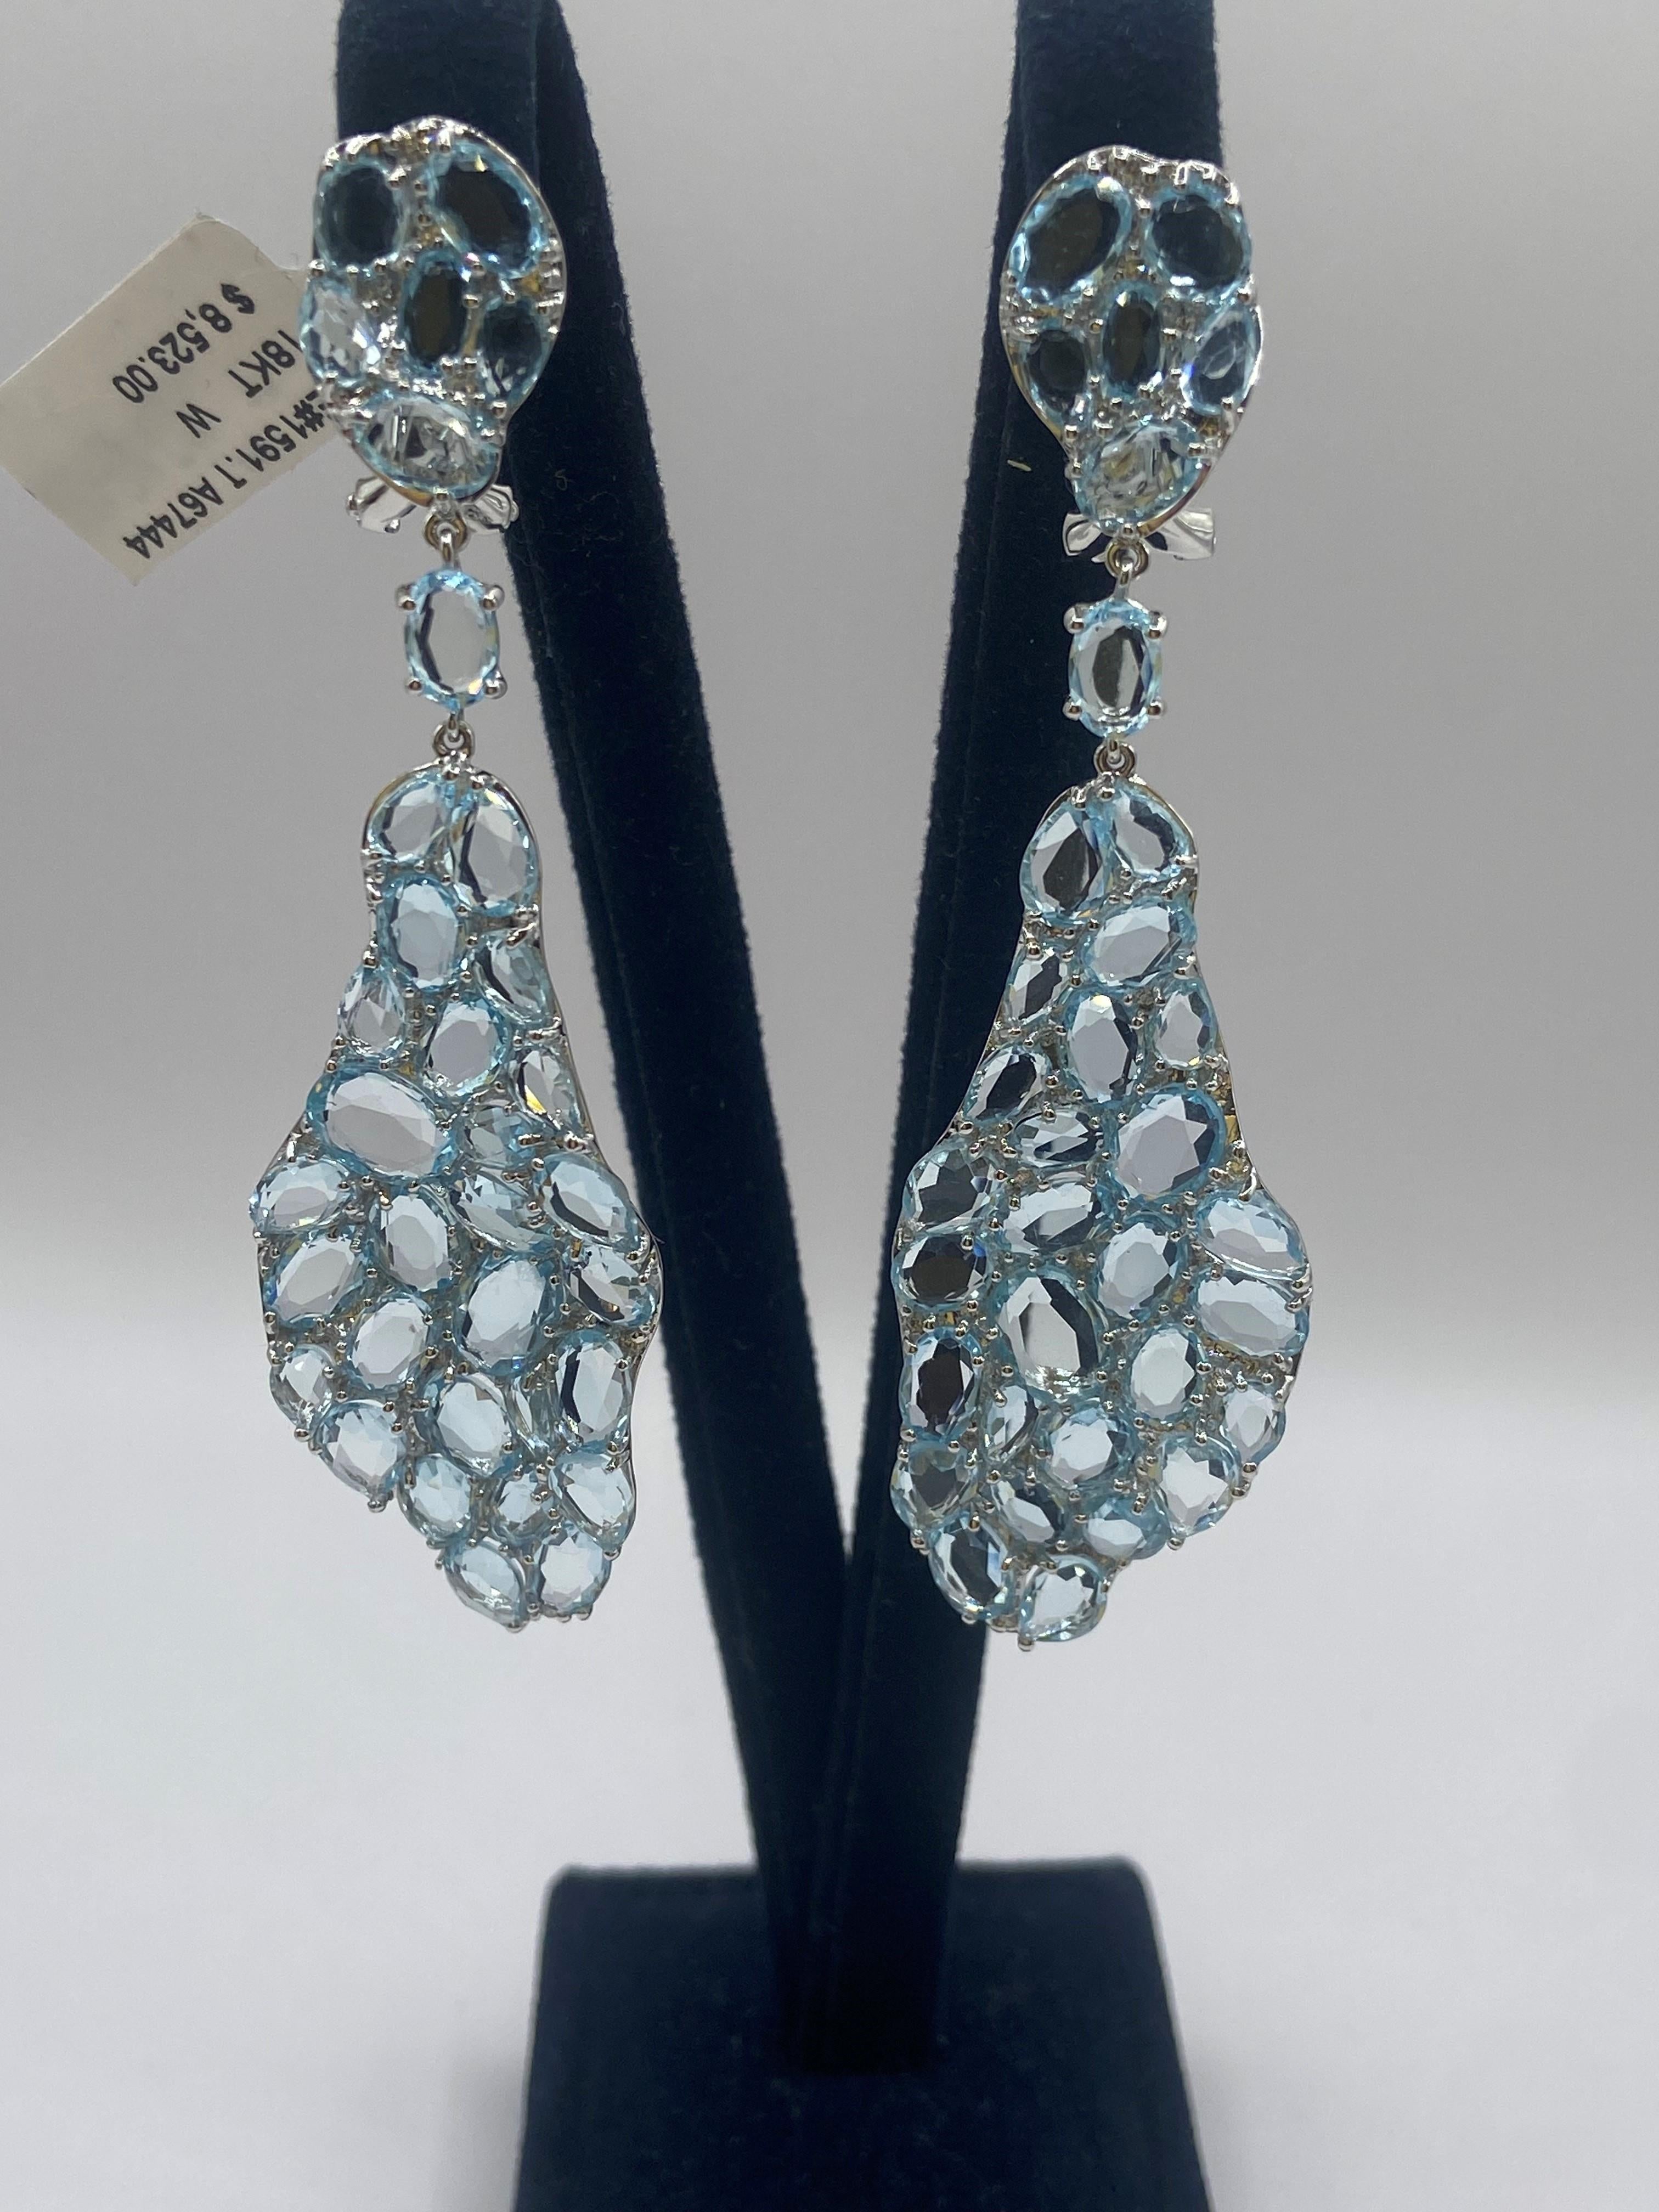 •	18KT White Gold
•	28.74 Carats

•	24 Round Diamonds: 0.13ctw
•	Color: F
•	Clarity SI1

•	Number of Rose Cut Blue Topaz: 68
•	Carat Weight: 28.61ctw

This pair of earrings is made with 68 rose cut light blue topaz stones, weighing 28.61 carats. The